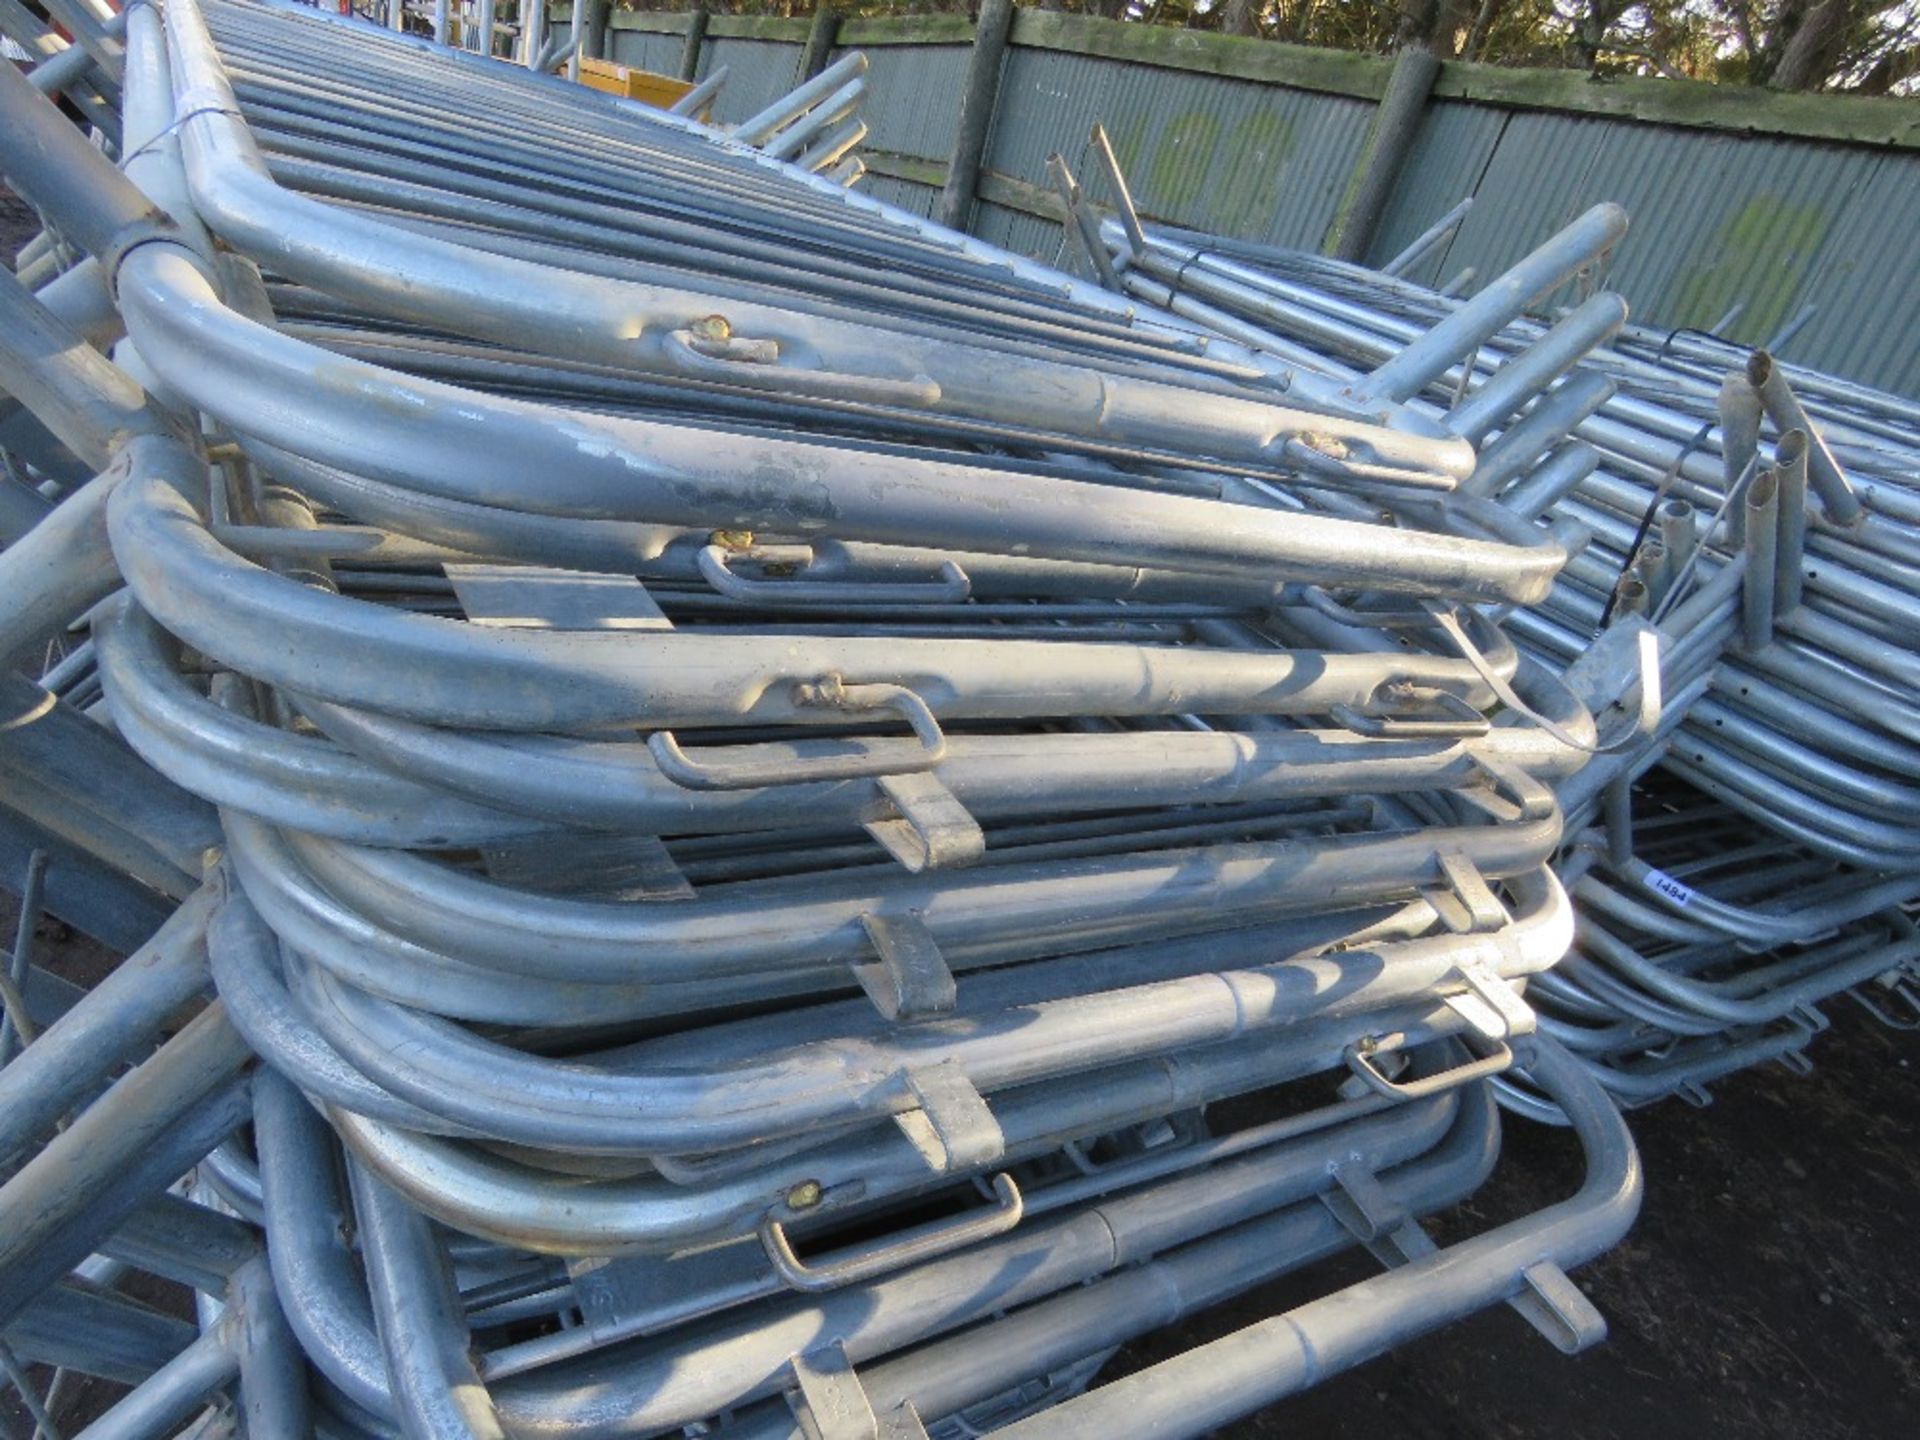 BUNDLE CONTAINING 15NO QUALITY GALVANISED CROWD BARRIERS, MAINLY SMARTWELD BRAND. MANY APPEAR UNUSED - Image 2 of 3